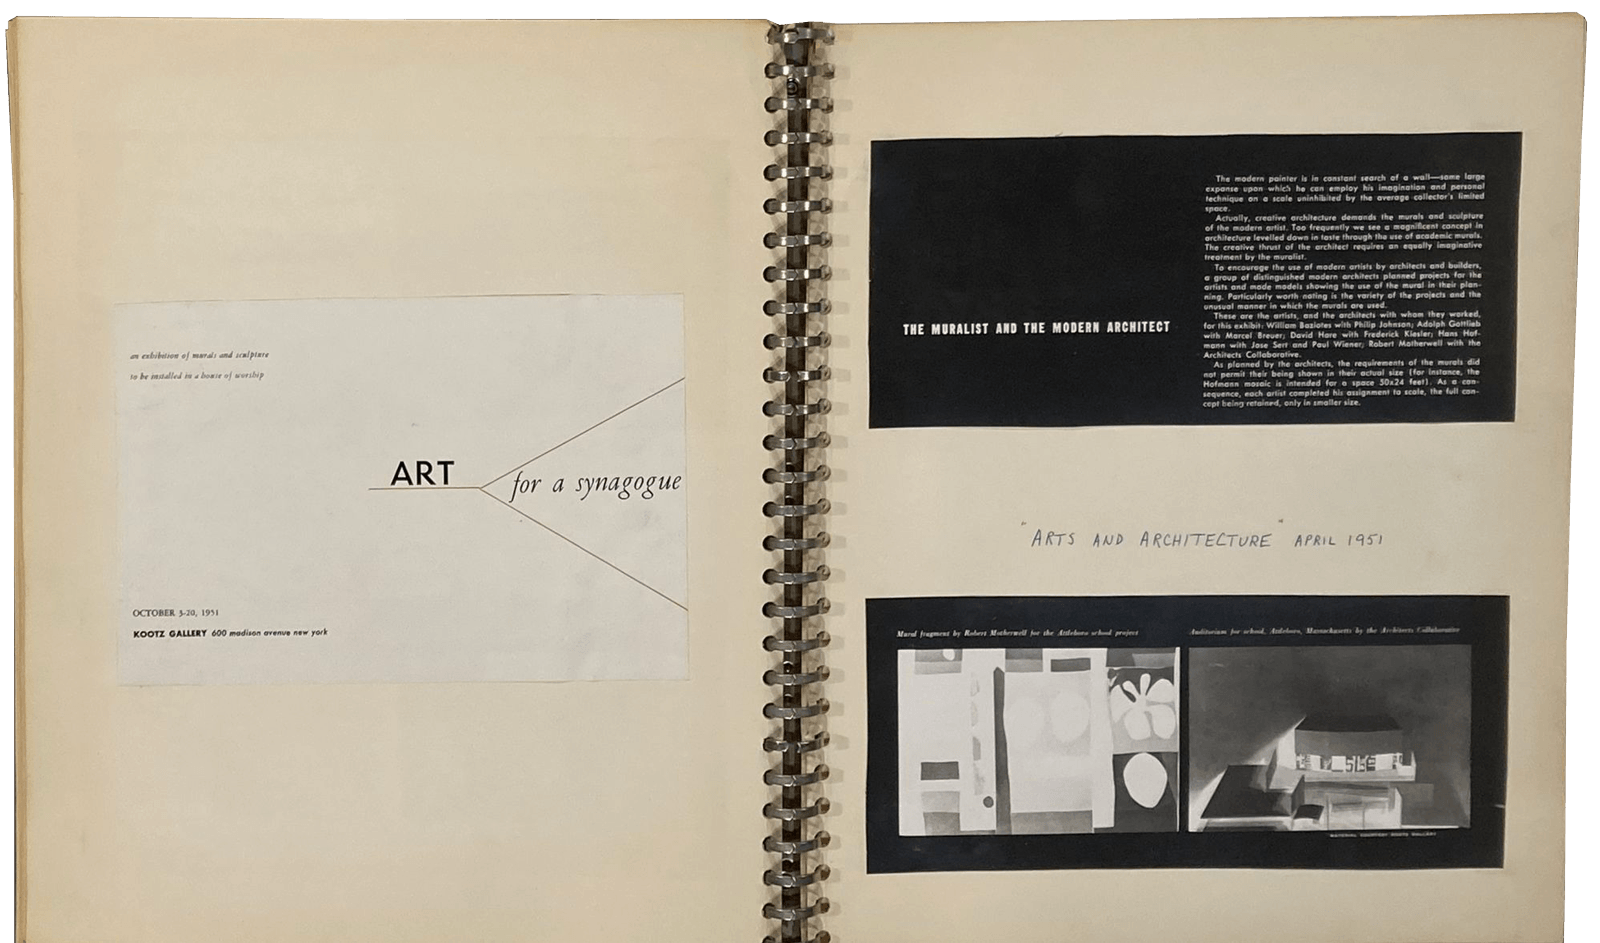 A page from a scrapbook by Robert Motherwell, featuring clippings from newspapers and magazines